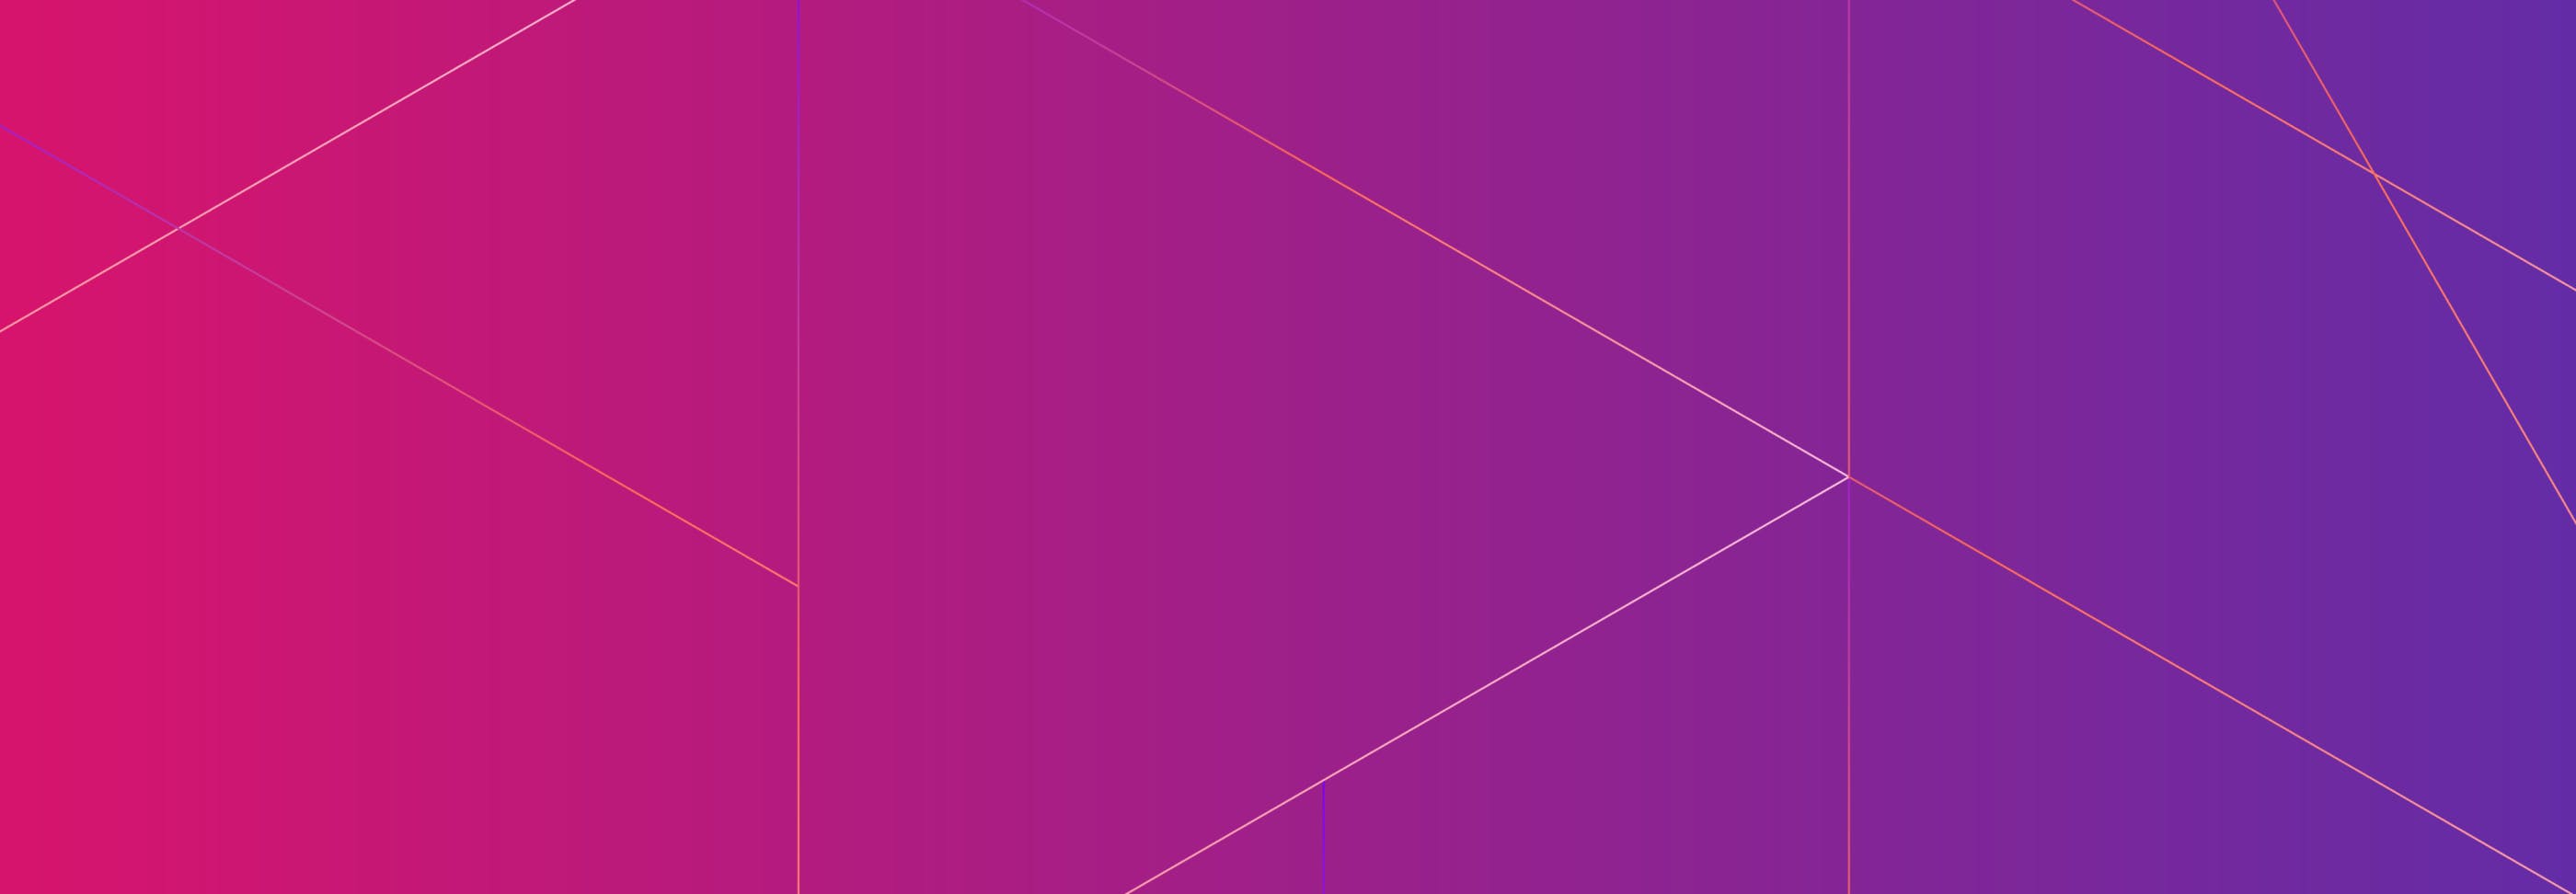 Datadog Announces Support for OpenTracing, Pairing Vendor-Neutral Standards with Powerful Application Performance Monitoring